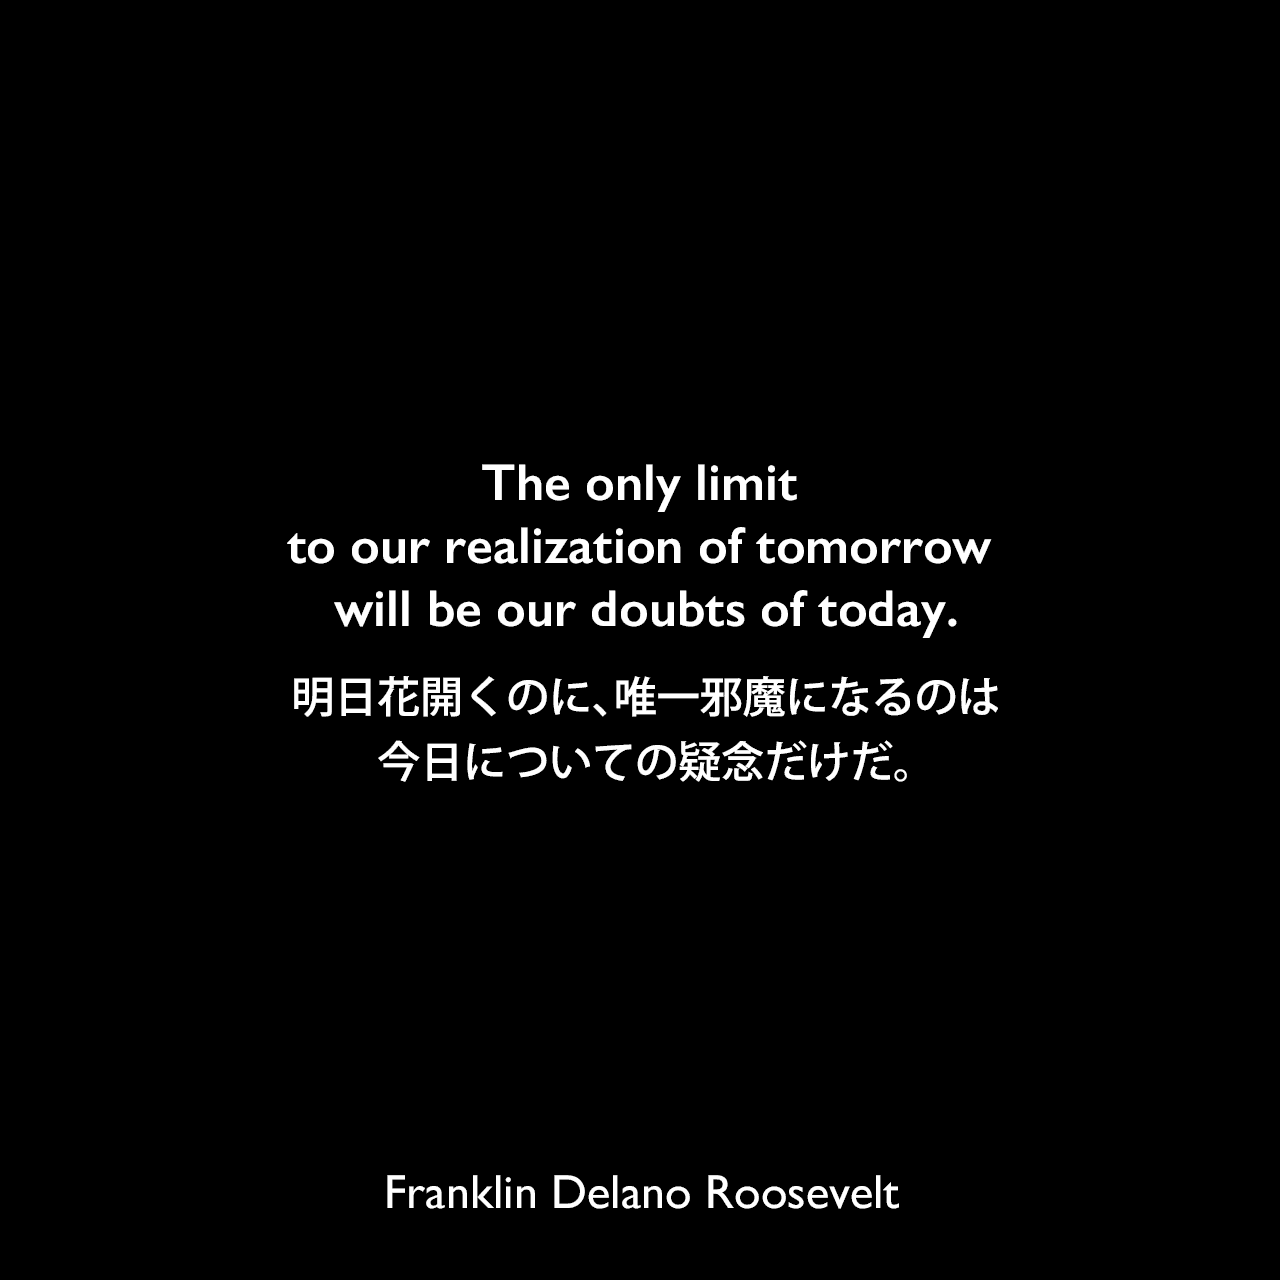 The only limit to our realization of tomorrow will be our doubts of today.明日花開くのに、唯一邪魔になるのは、今日についての疑念だけだ。Franklin Delano Roosevelt